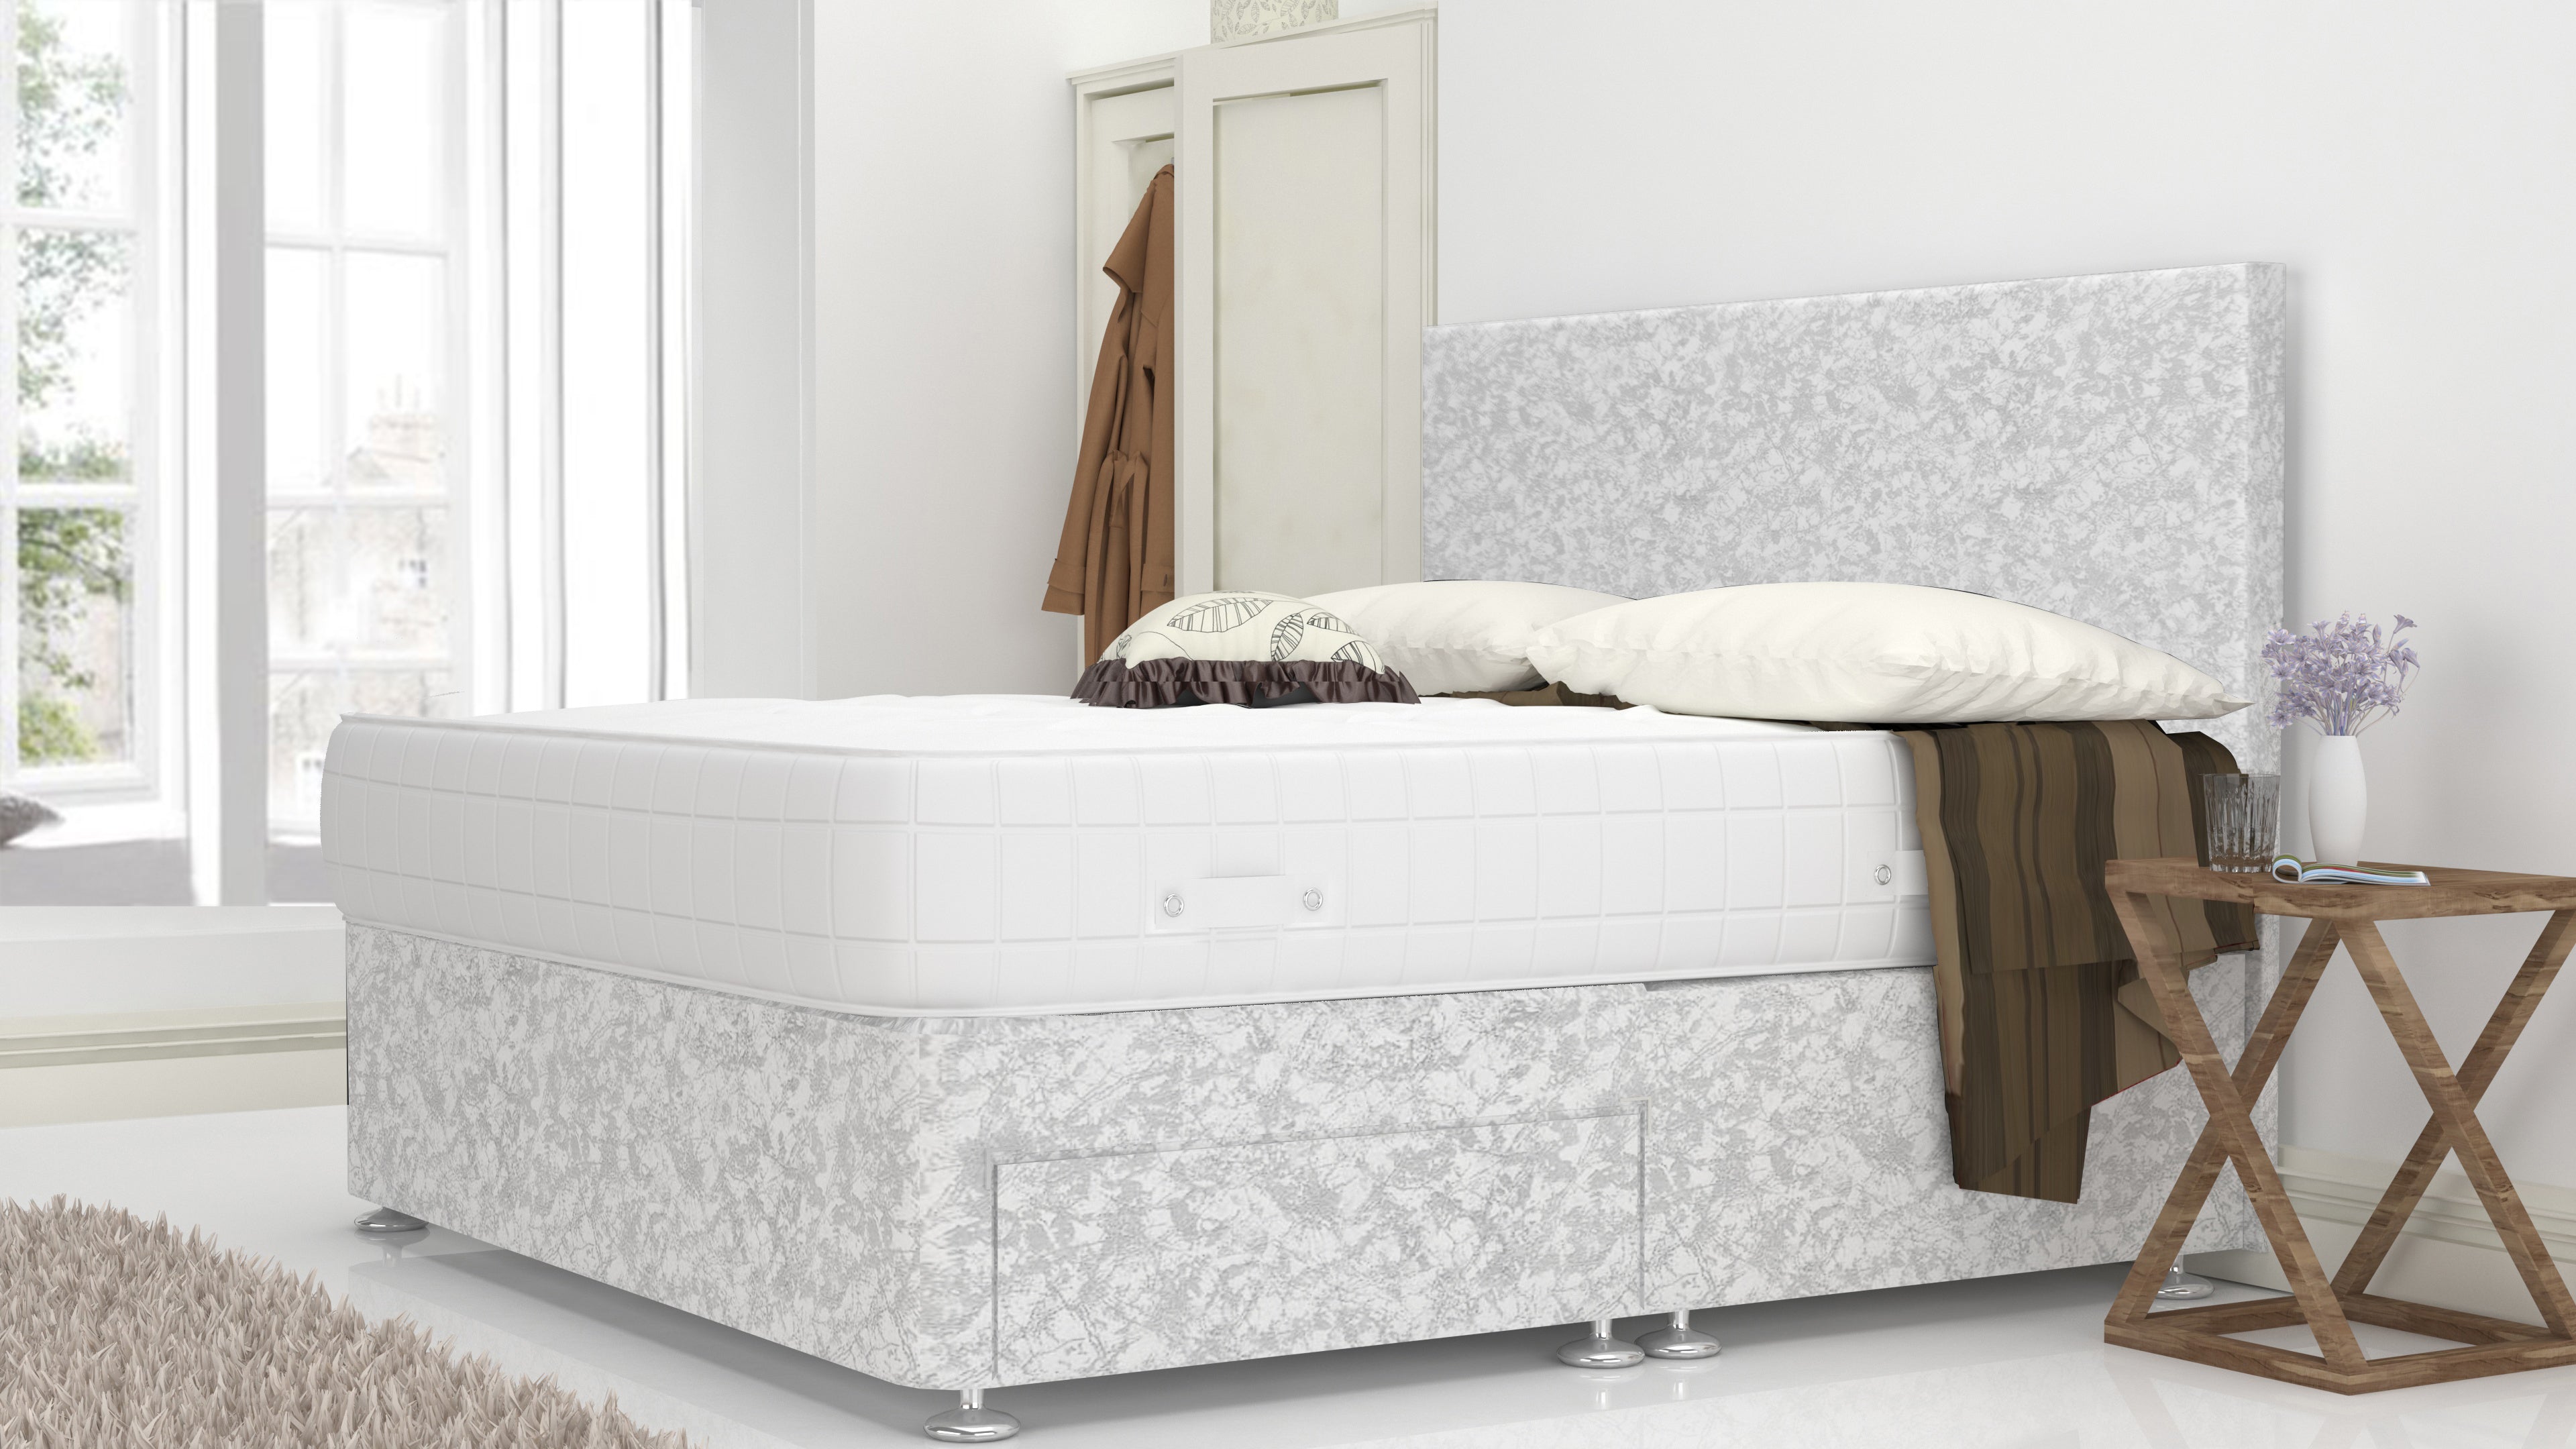 White Crushed Velvet 3 Feet Divan Bed With Plain Headboard (Included Feet) And Free Memory Foam Mattress